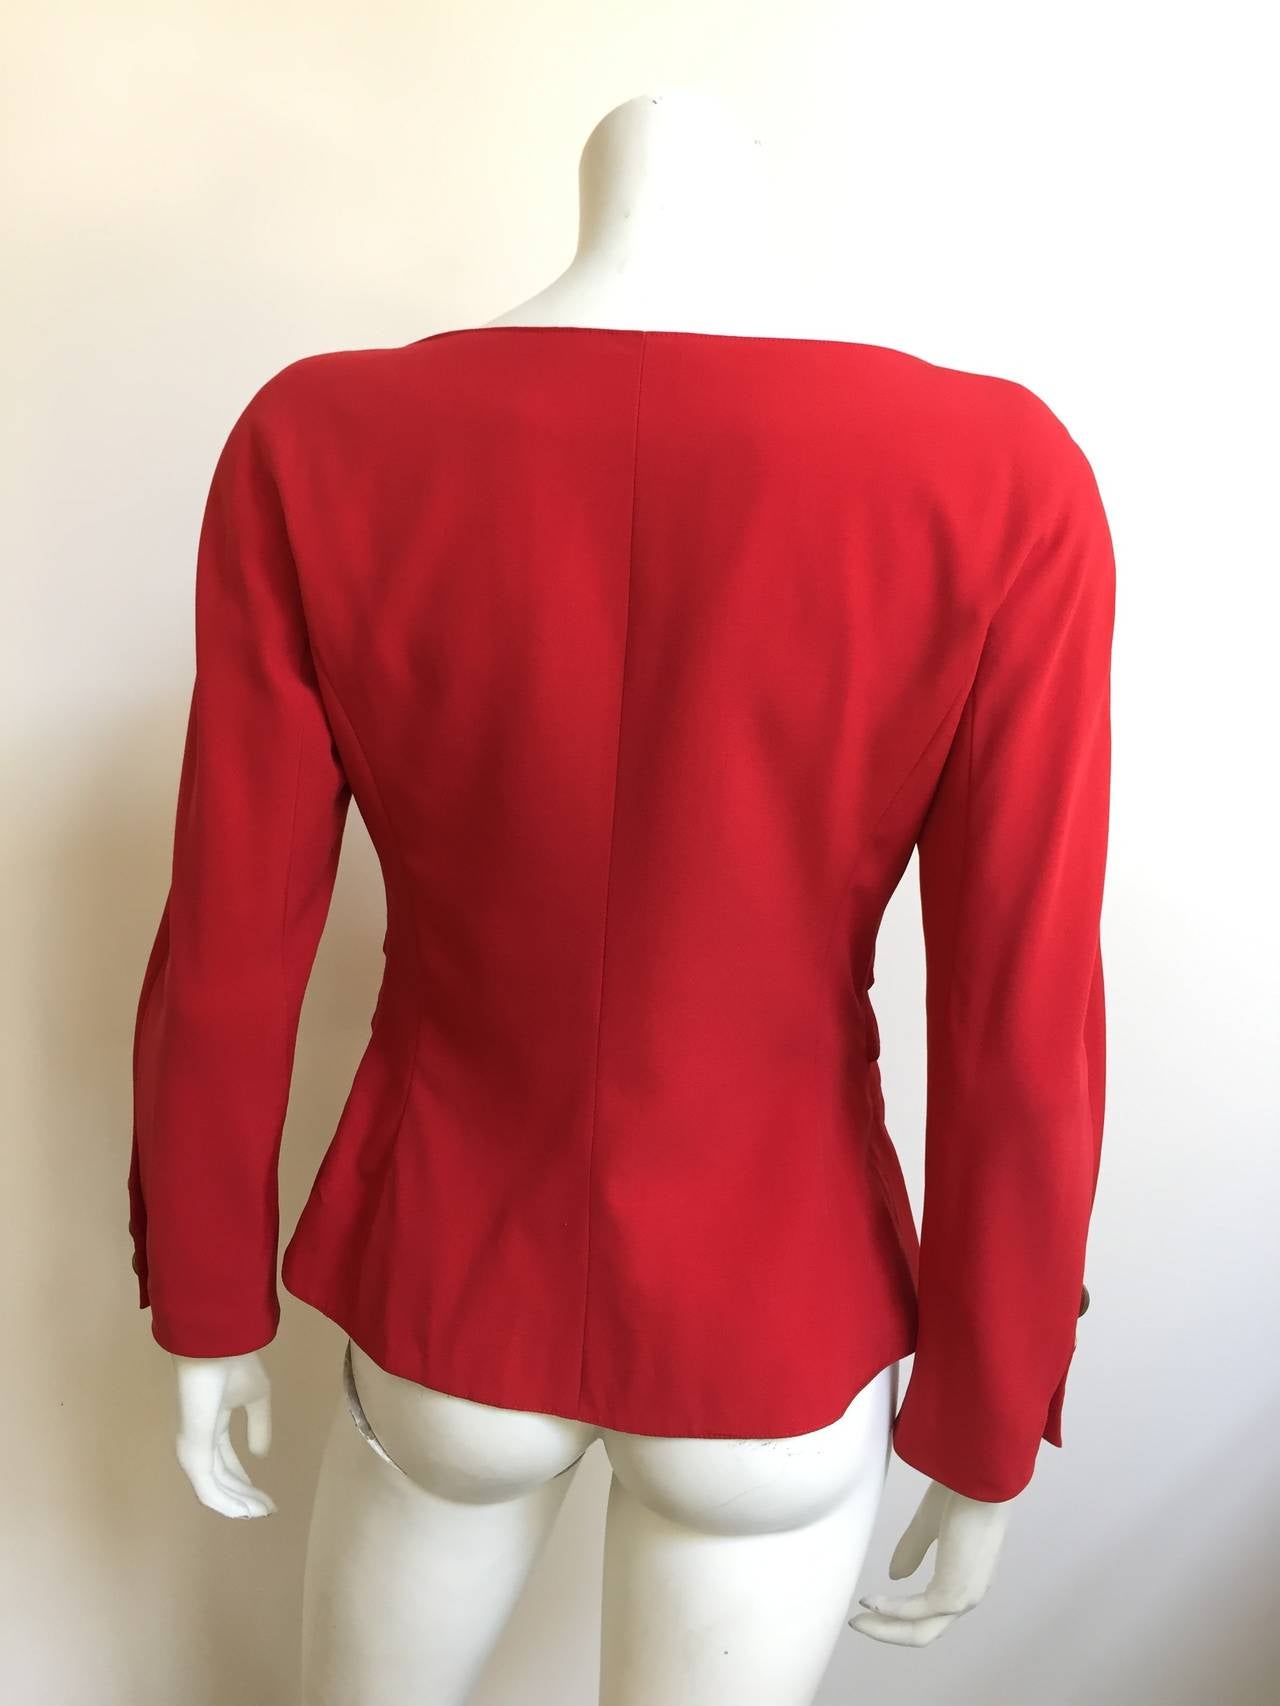 Jacques Molko 1980s Red Woven Wool Jacket Size 6. For Sale 2